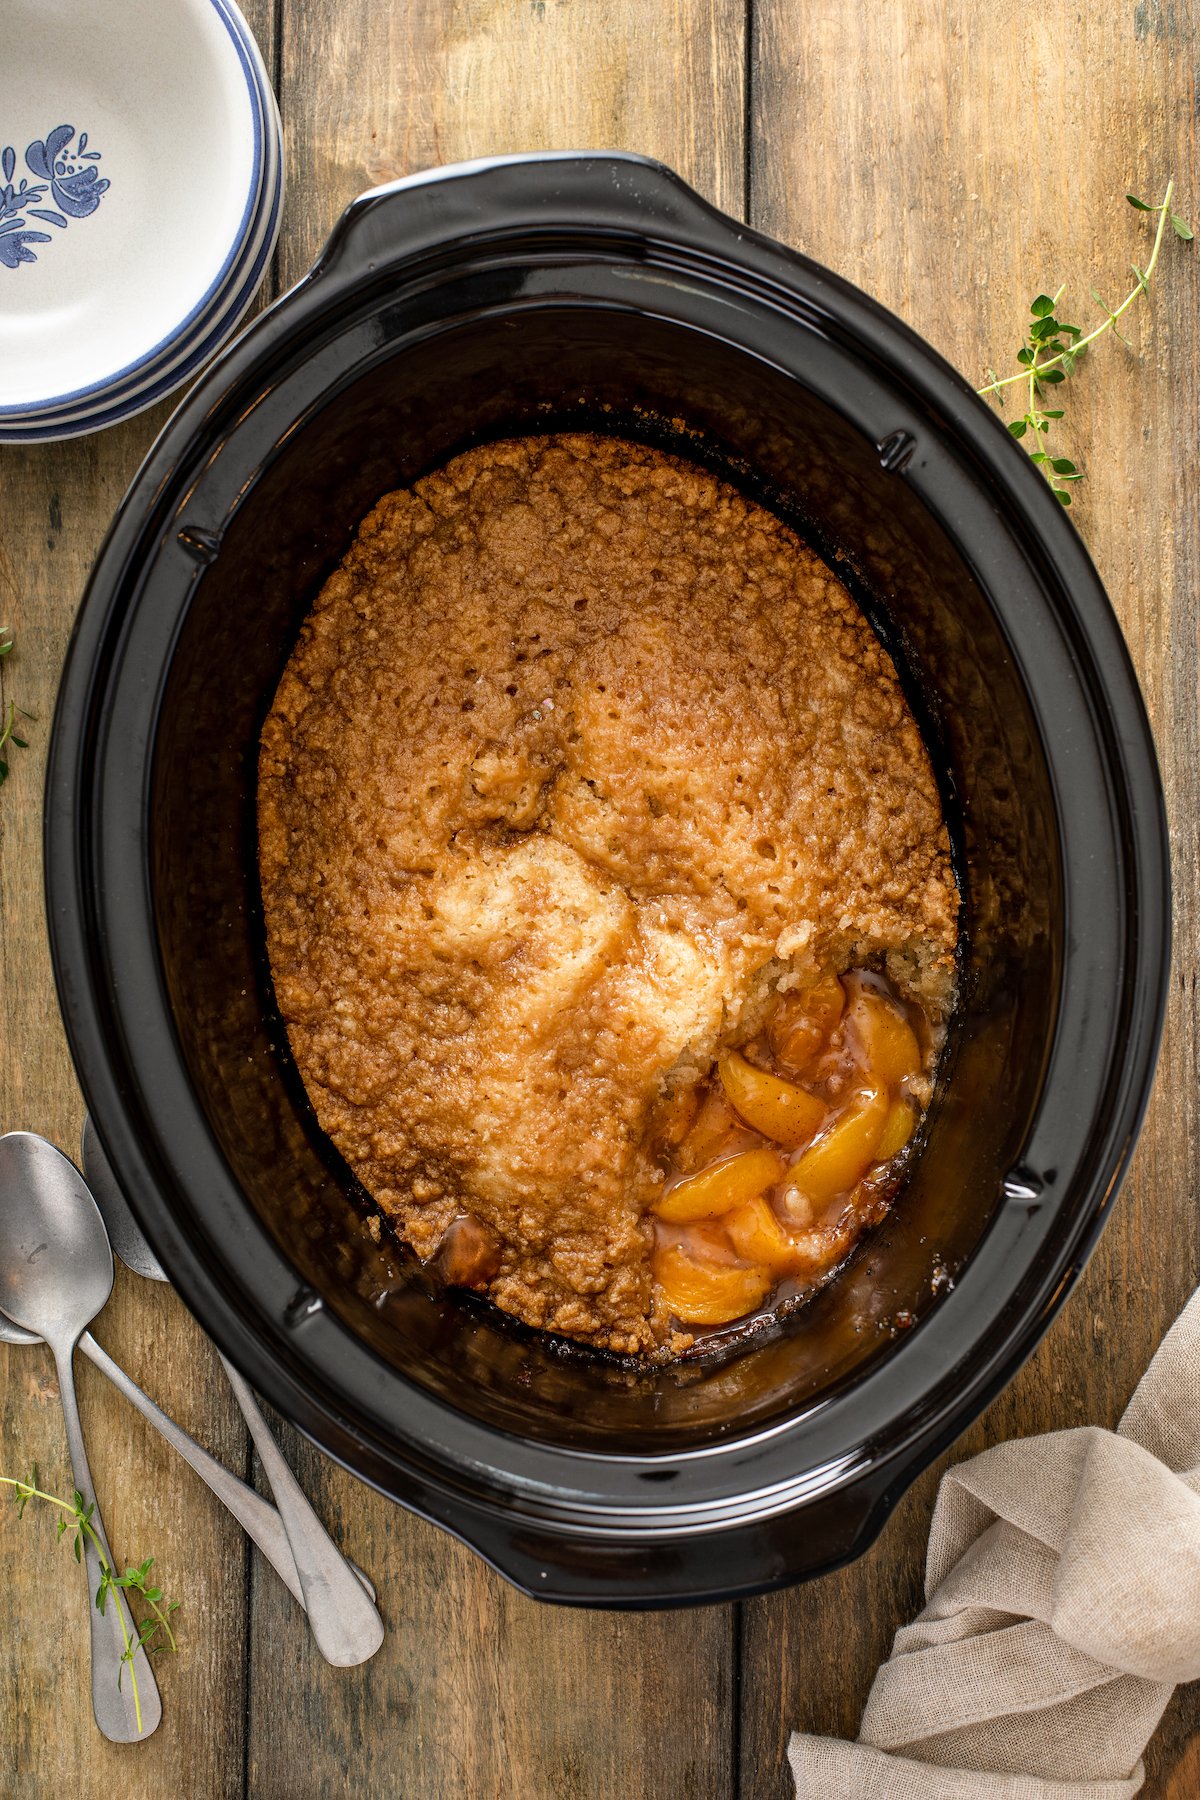 Cooked peach cobbler inside a crock pot with a scoop missing from the corner.